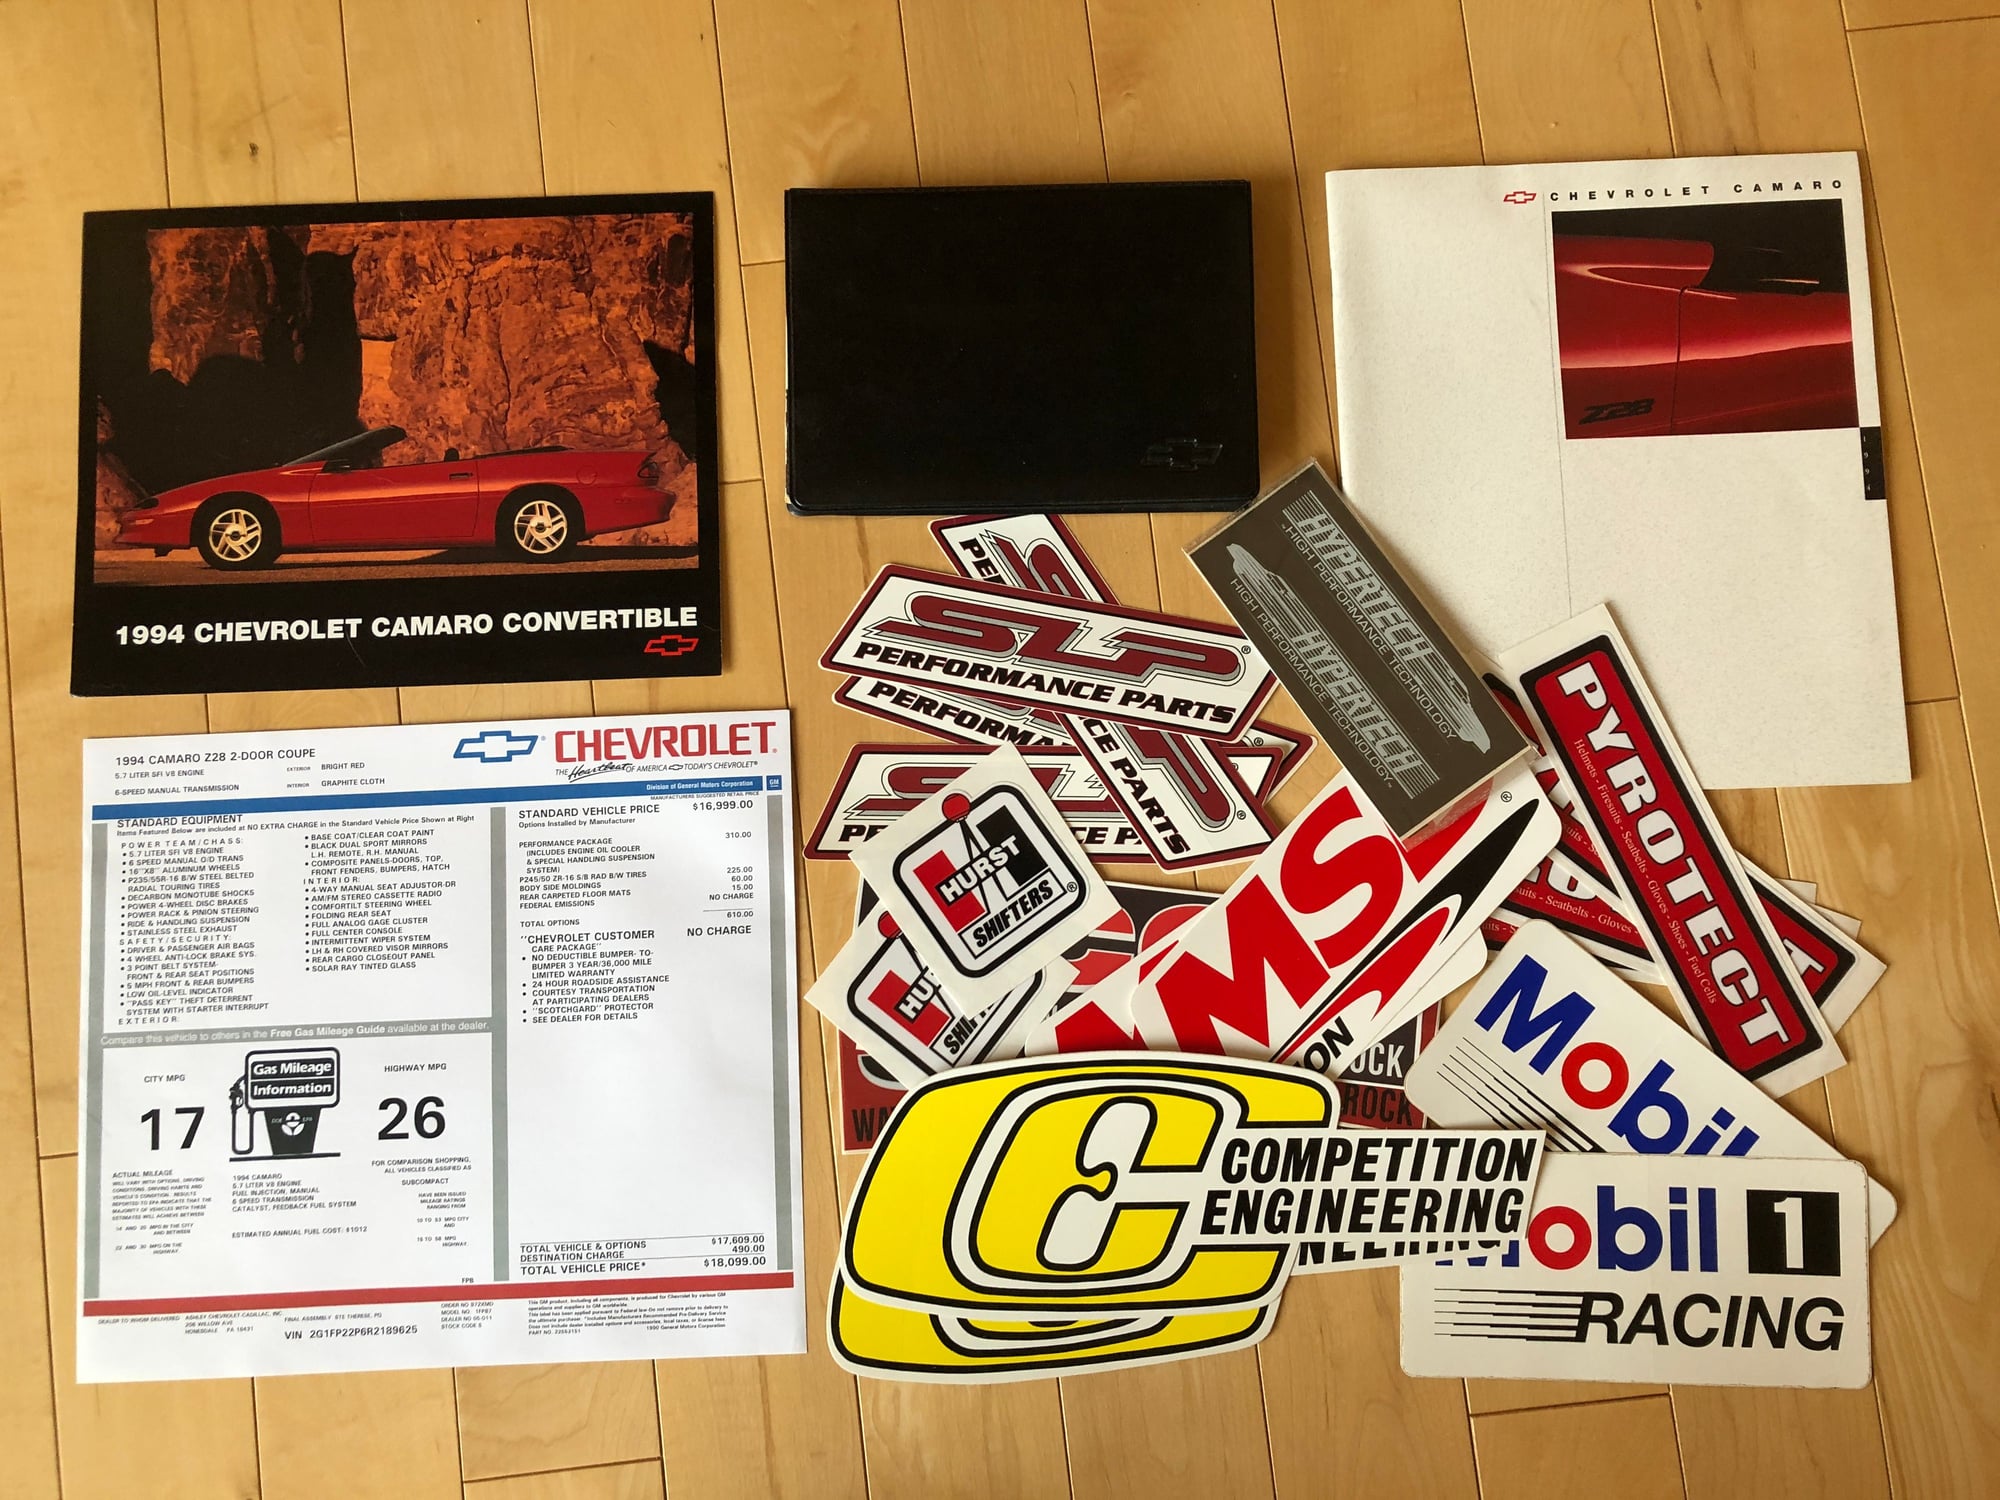 1994 Chevrolet Camaro - 1994 Z28 1LE - Track Day/Autocross Car - Used - VIN 2G1FP22P6R2189625 - 52,691 Miles - 8 cyl - 2WD - Manual - Coupe - Red - Hollidaysburg, PA 16648, United States